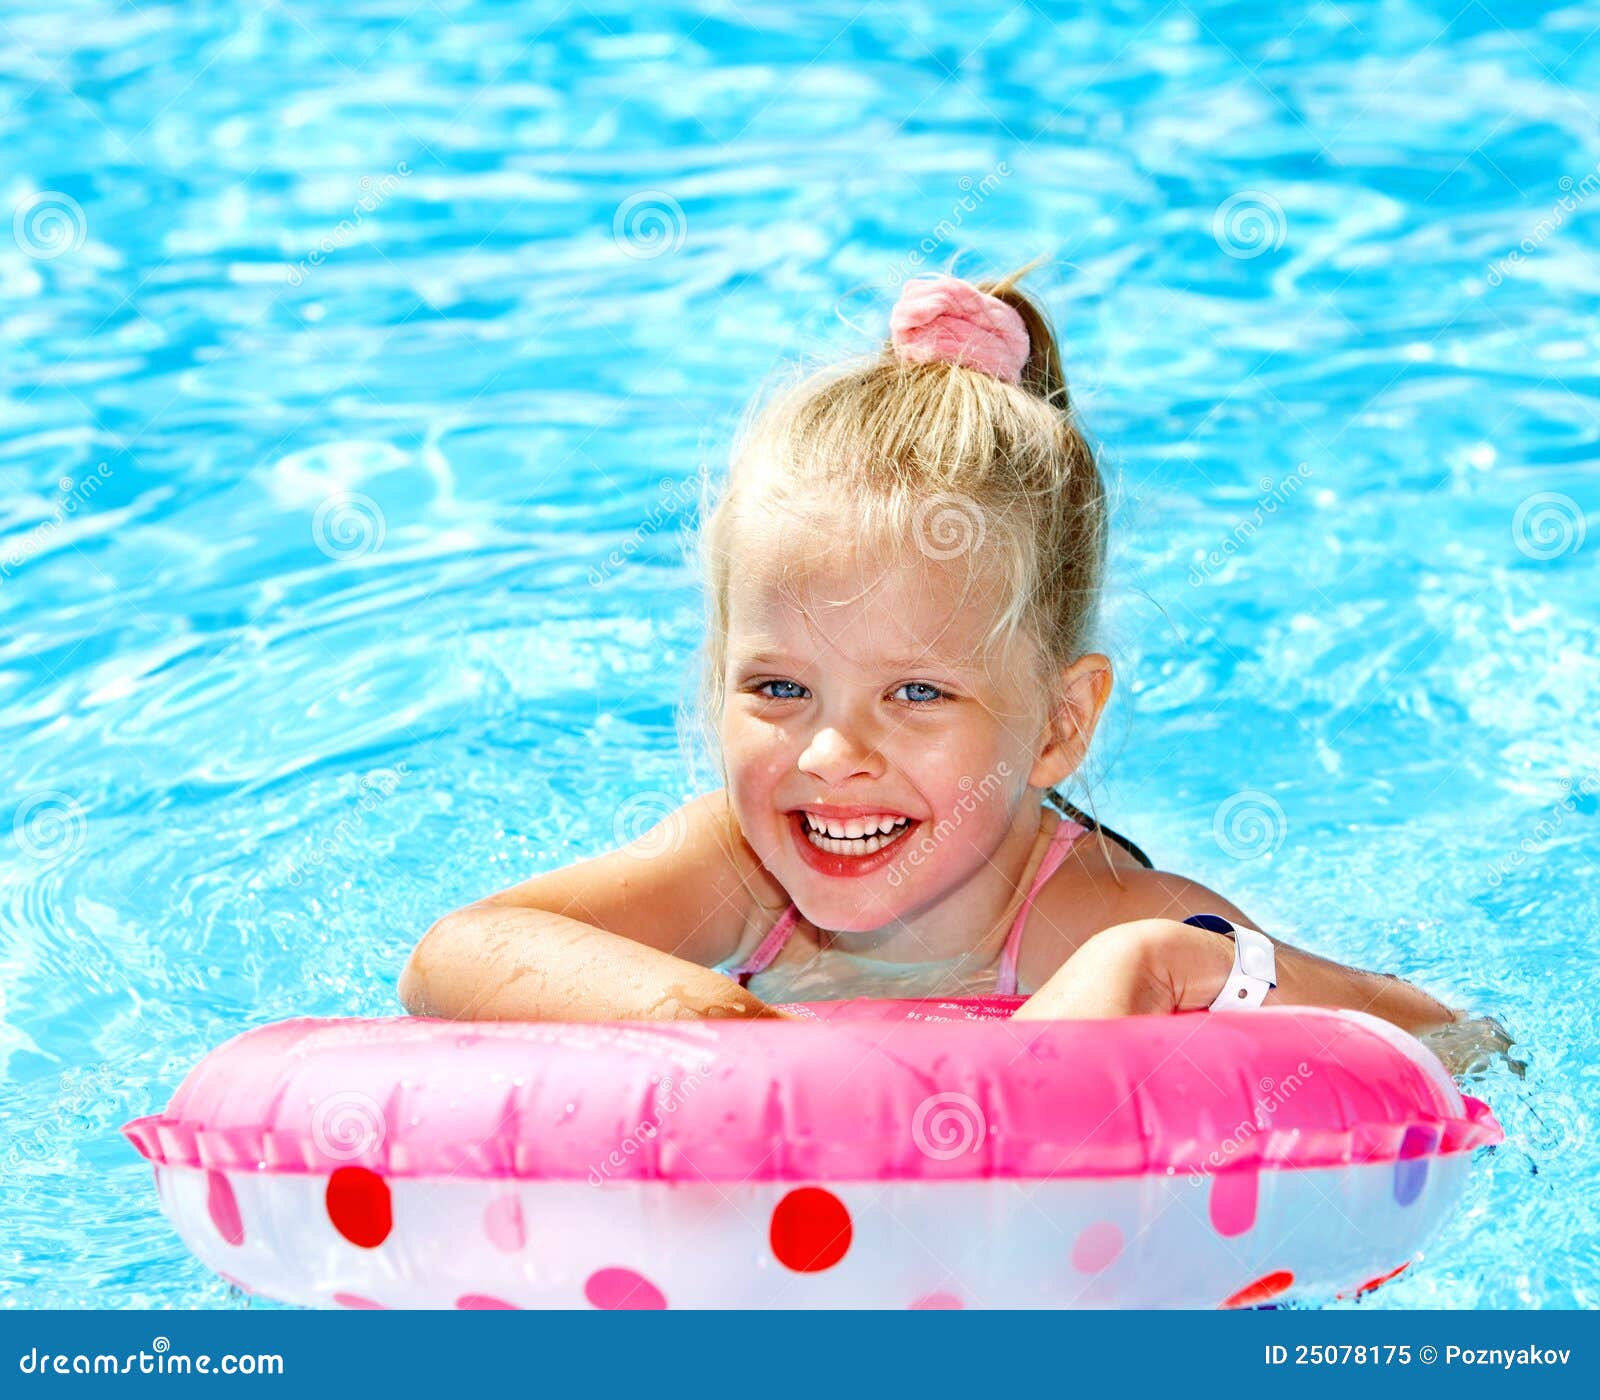 Child Sitting on Inflatable Ring in Swimming Pool. Stock Image - Image ...